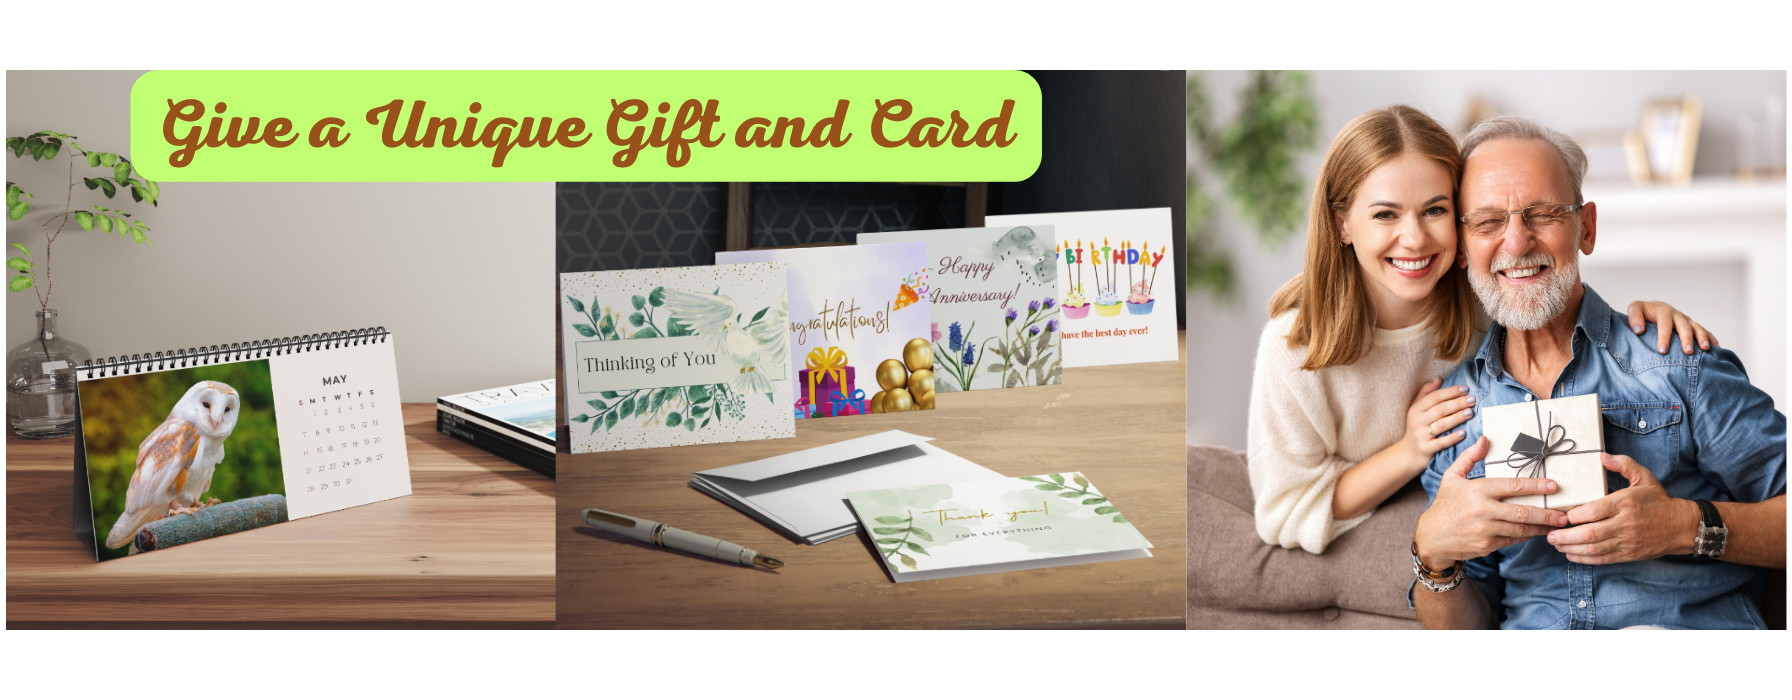 Unique Gift and Card